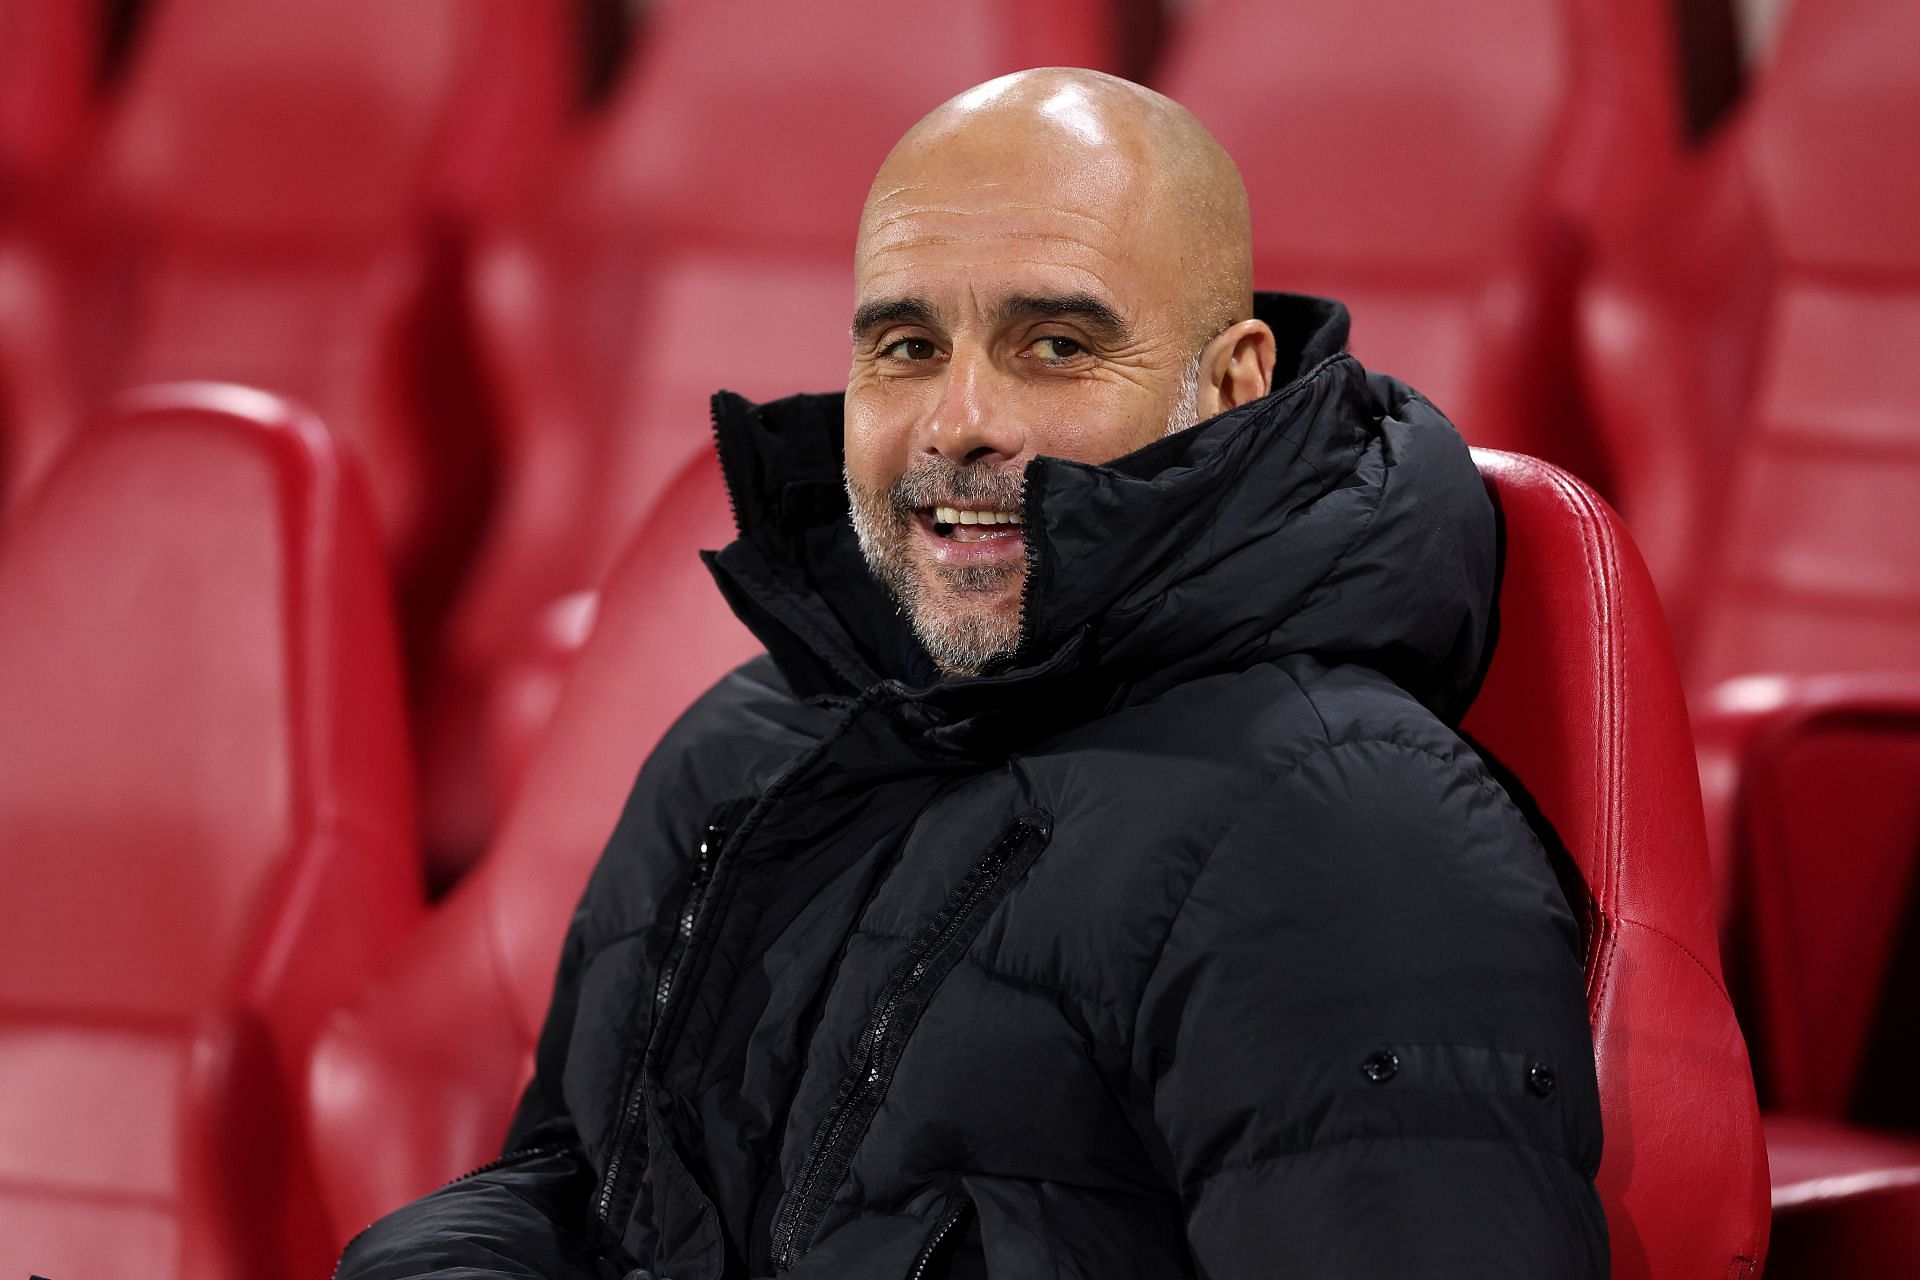 Pep Guardiola might be supporting the Red Devils on Sunday.